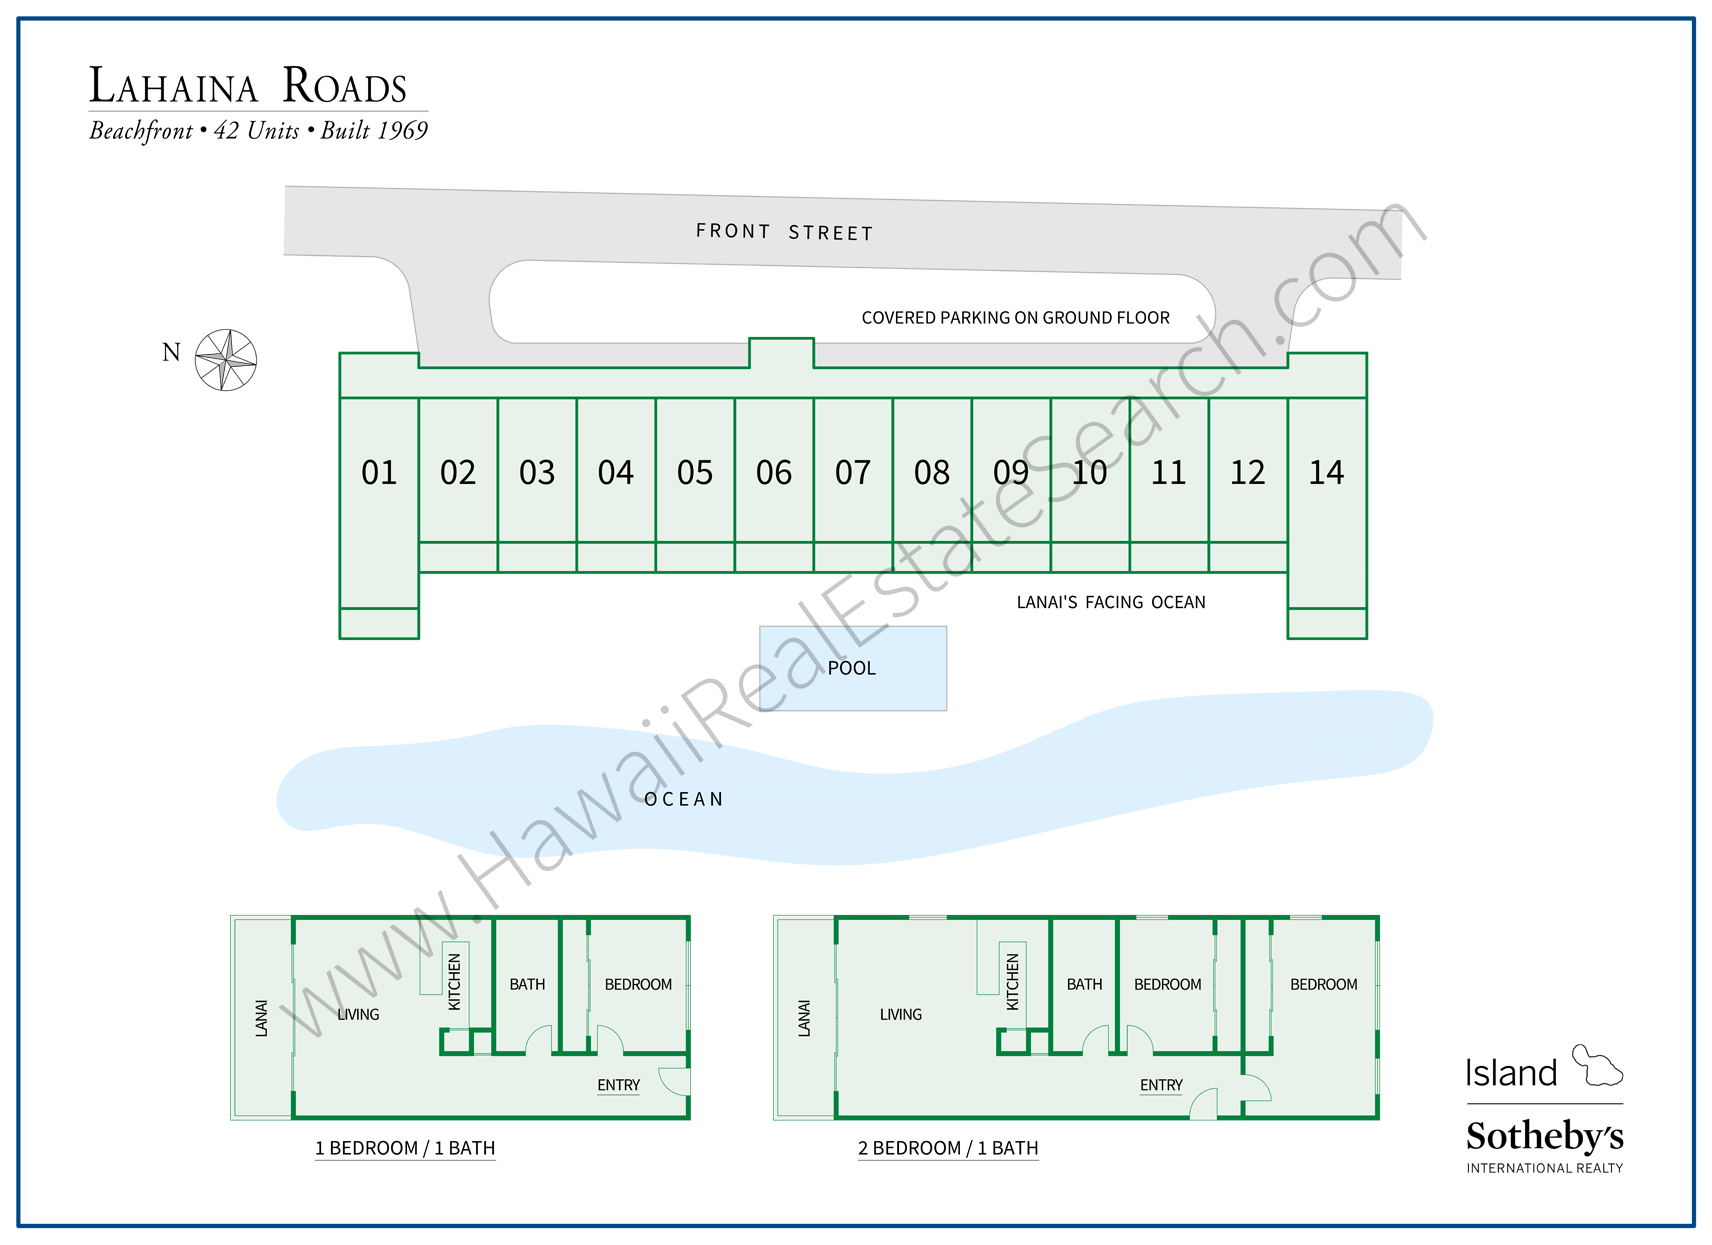 lahaina roads floor plan and map